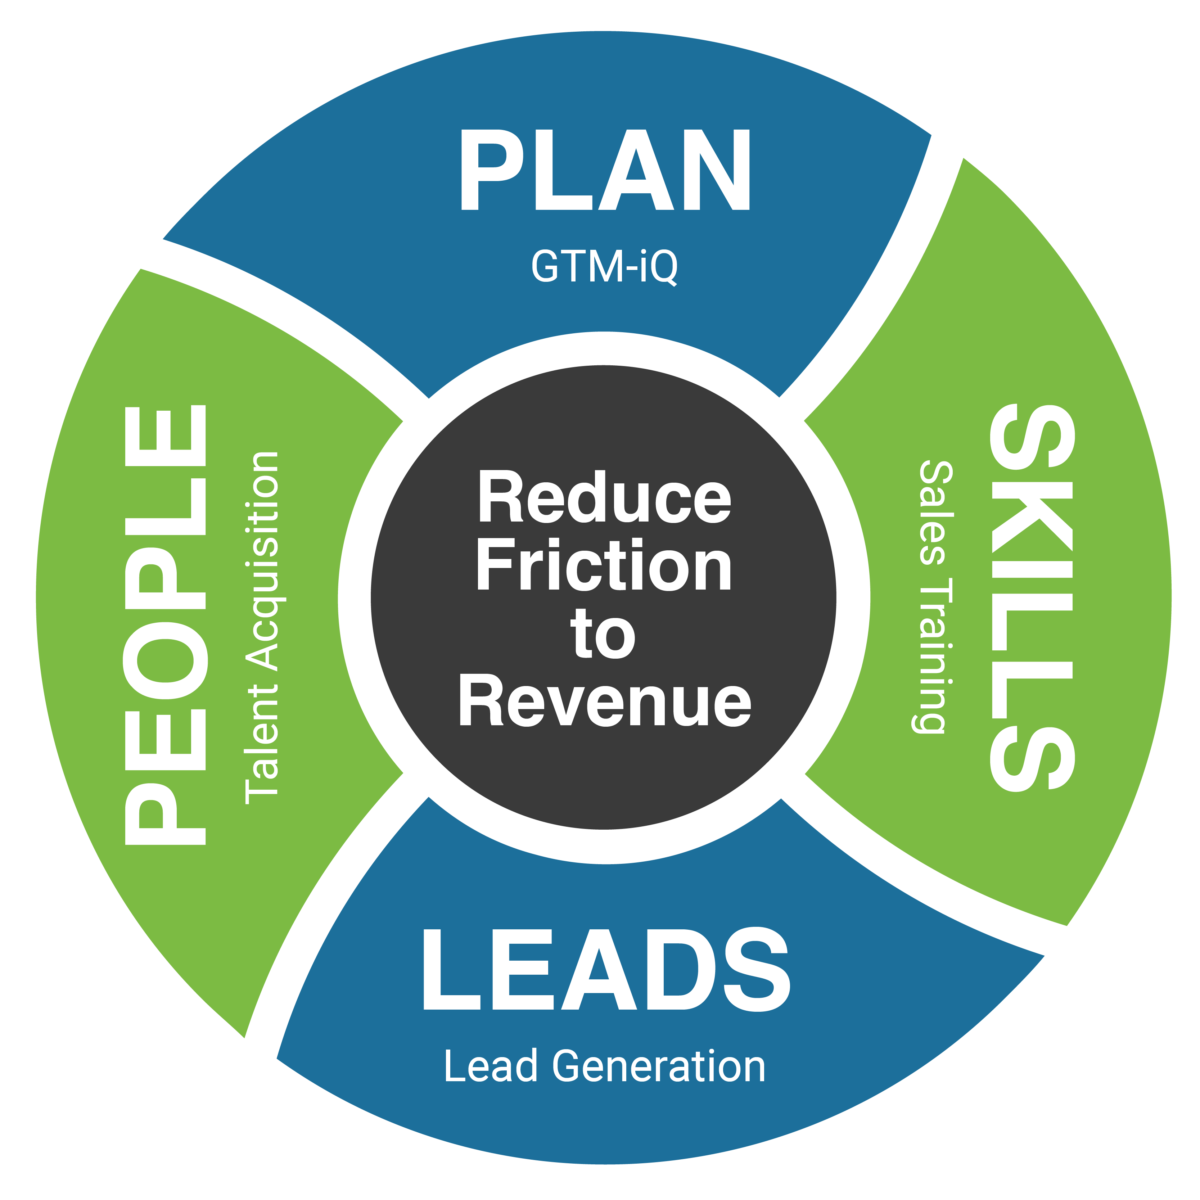 Reduce Friction to Revenue